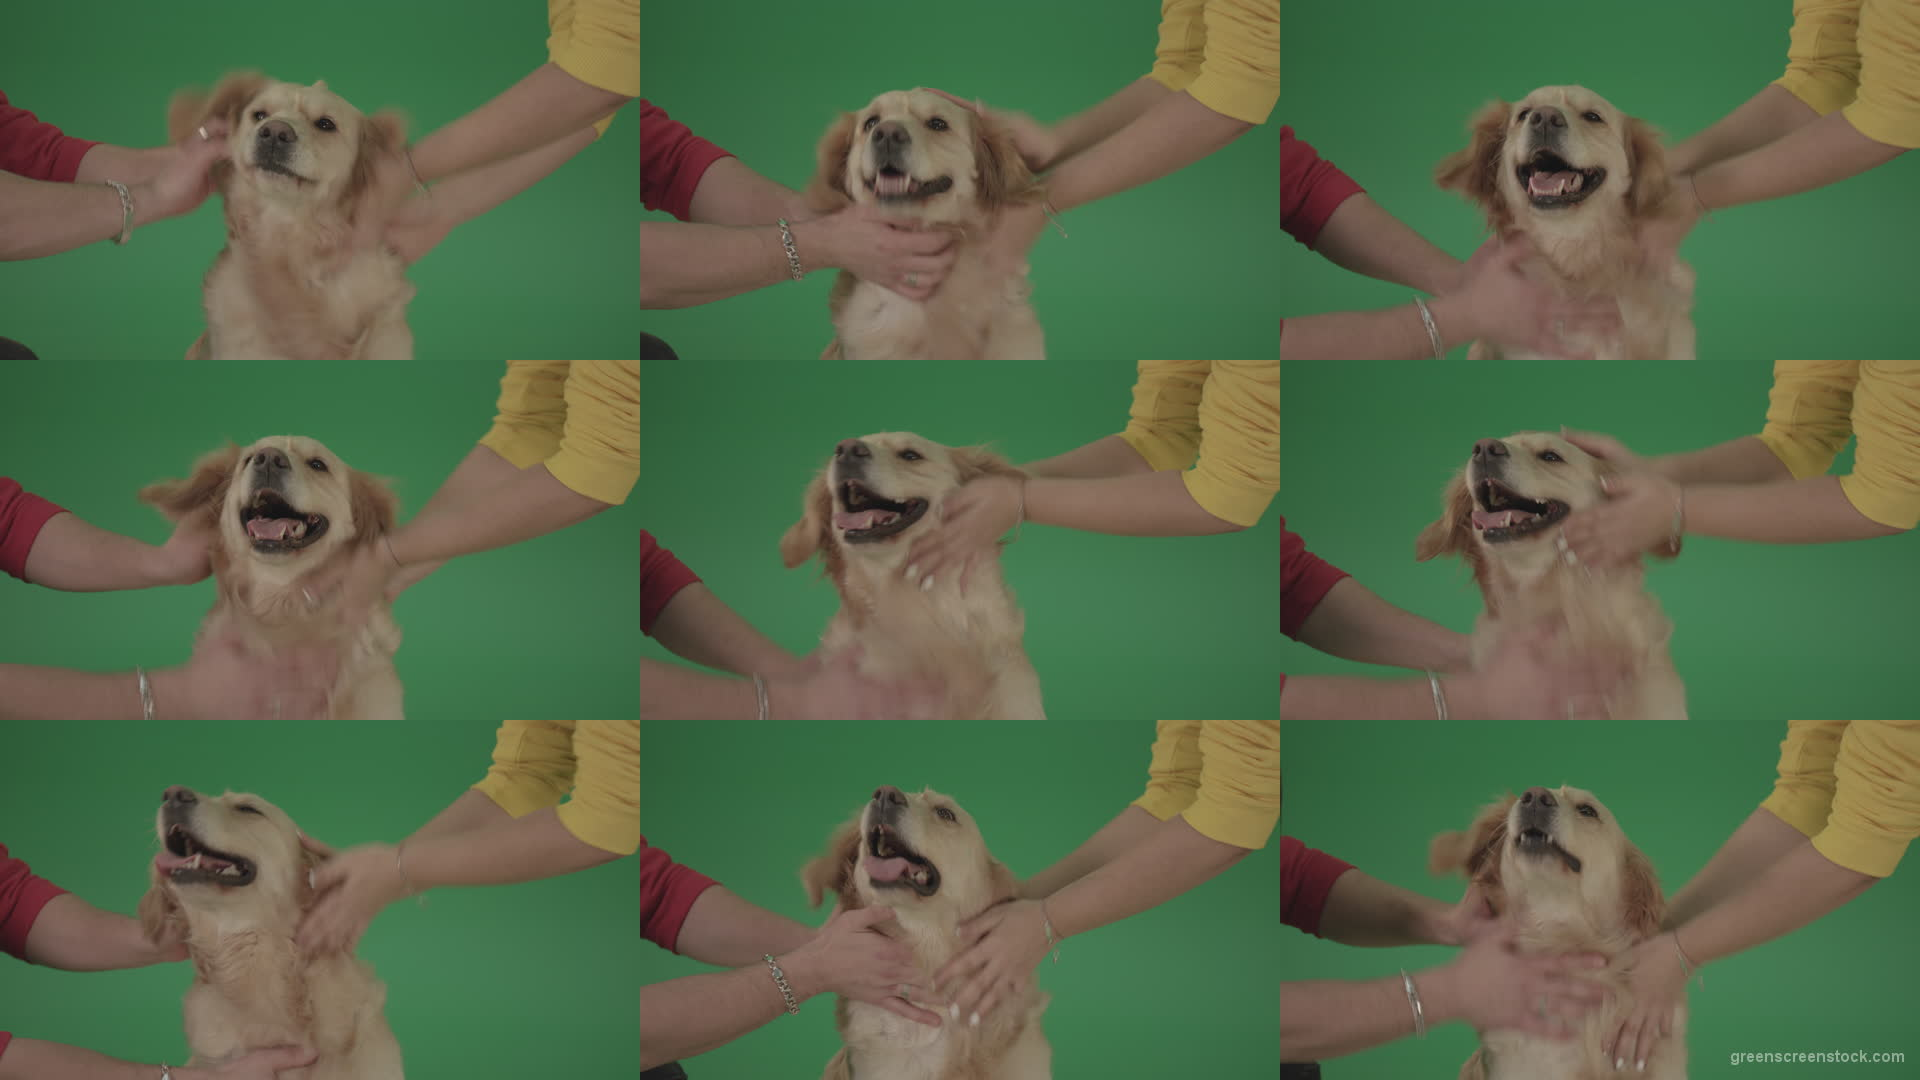 Funny-Golden-Retriever-owners-stroke-from-two-hands-hunter-Dog-isolated-on-green-screen-4K-video-footage Green Screen Stock